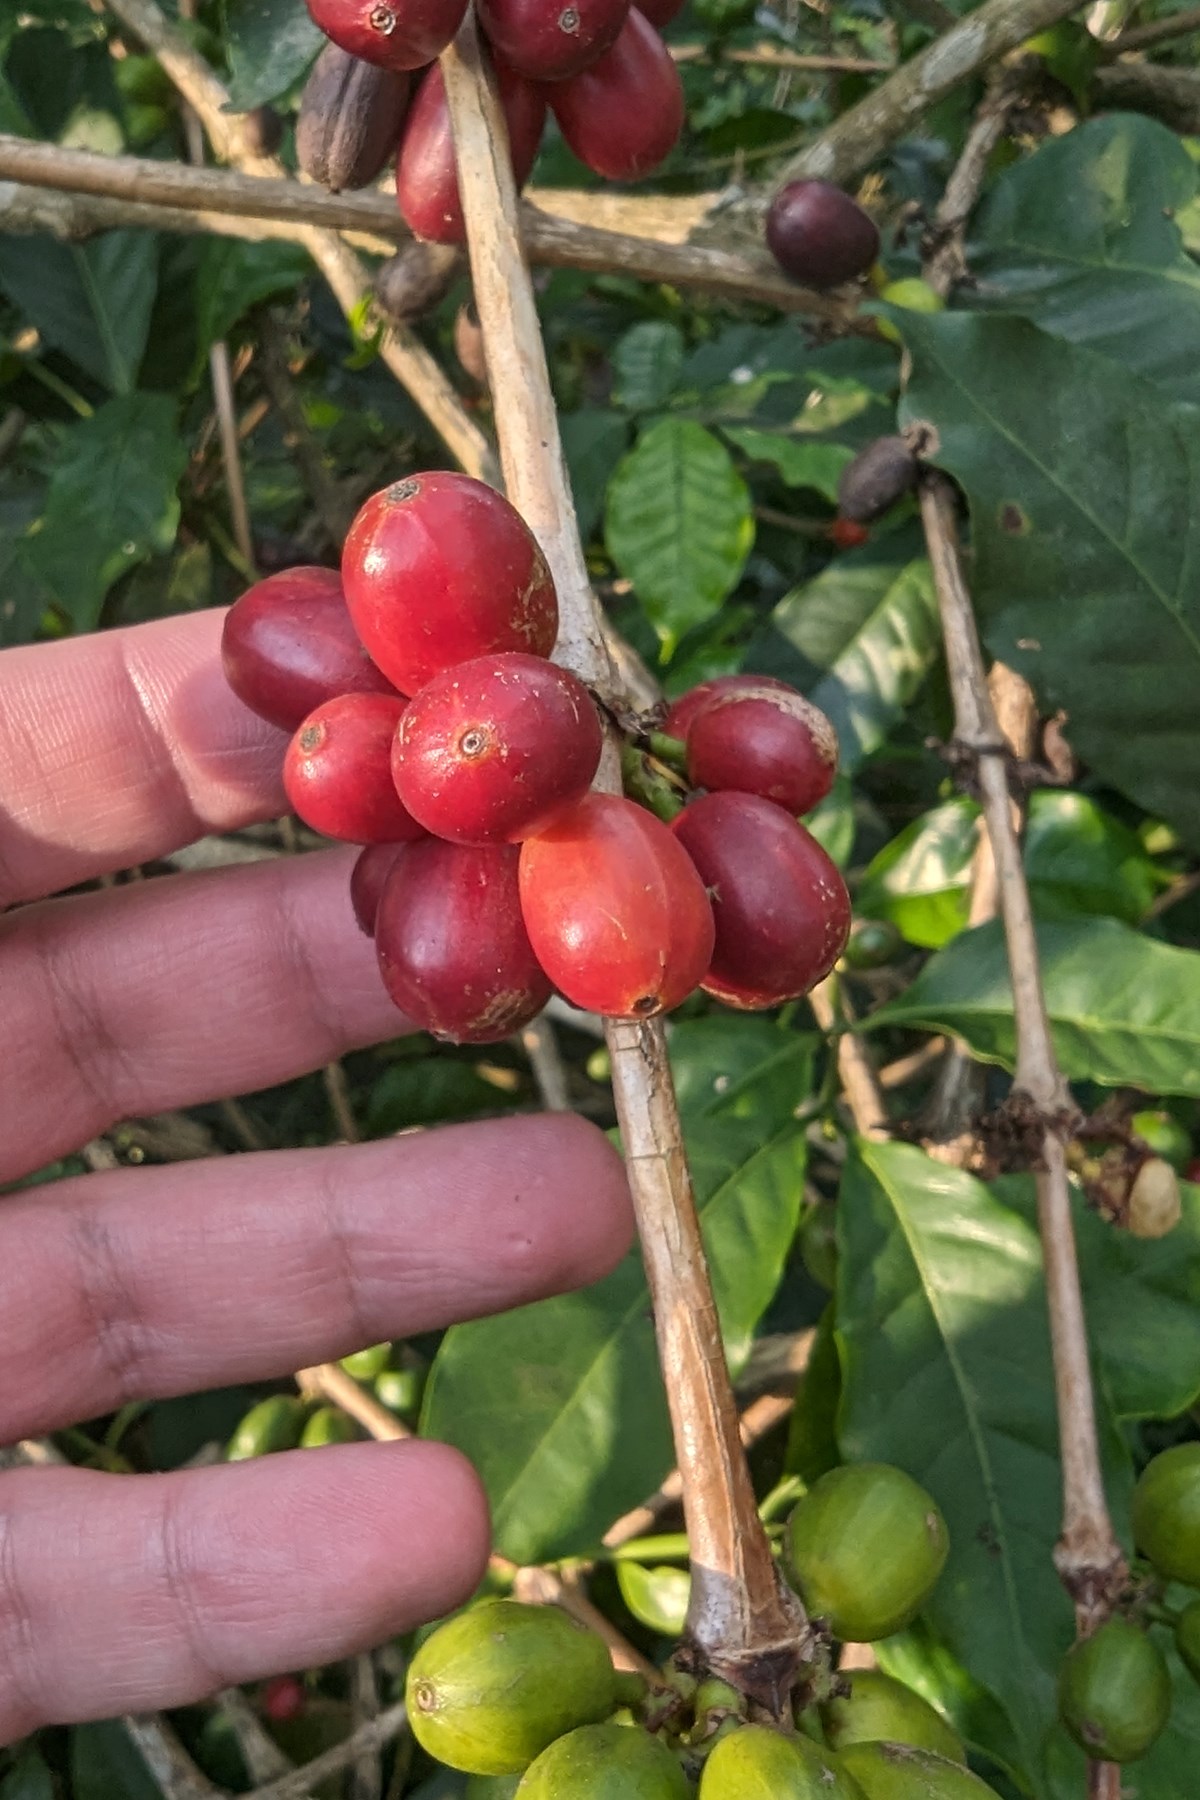 A closeup photo of a hand touching coffee cherries on the vine.